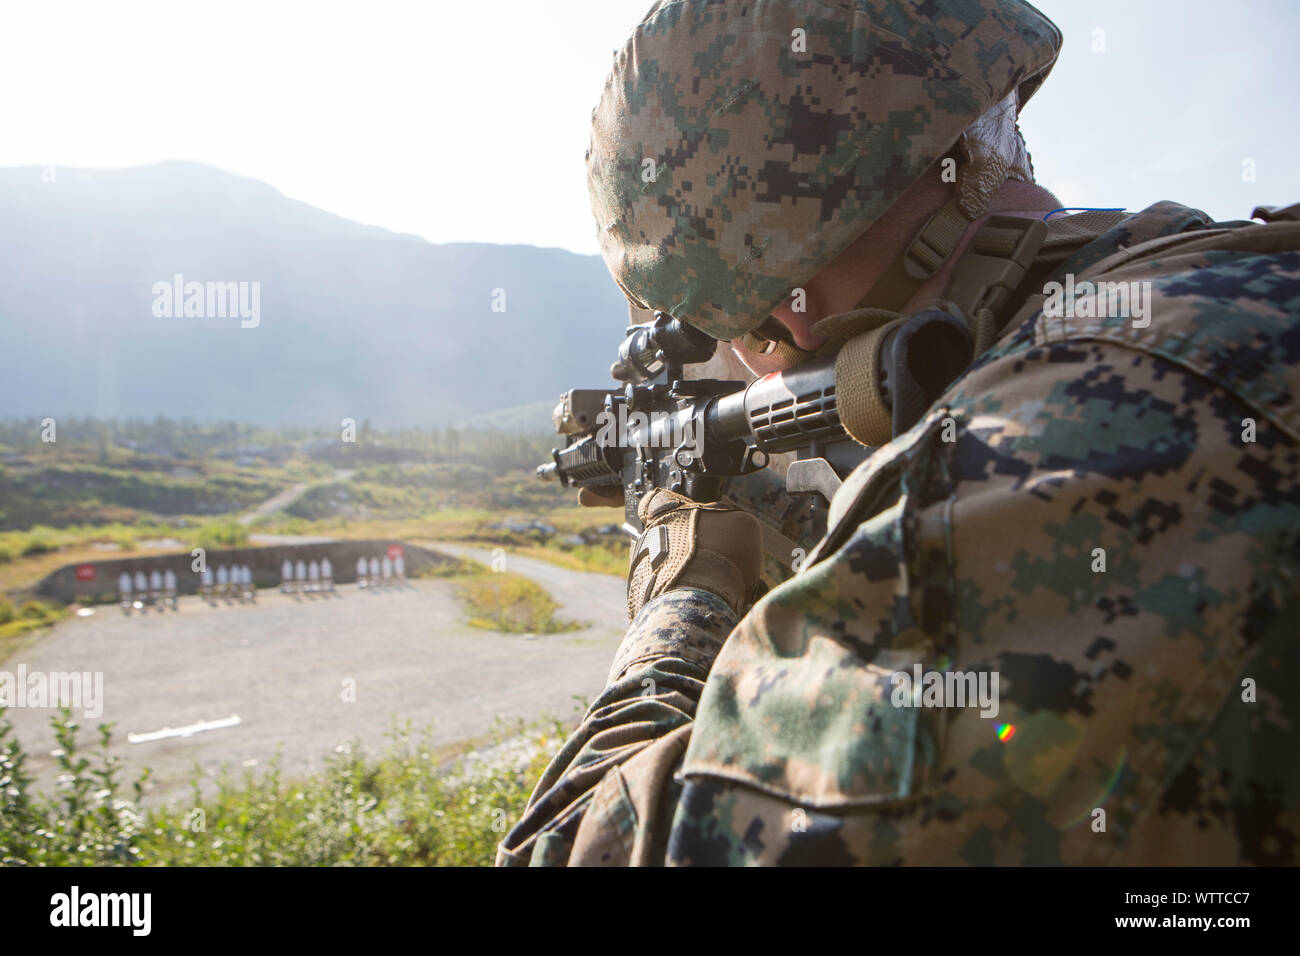 A U.S. Marine with Marine Rotational Force-Europe 19.2, Marine Forces Europe and Africa, fires an M4 carbine during a rifle range in Setermoen, Norway, Aug. 28, 2019. MRF-E focuses on regional engagement conducting various cold weather and mountain warfare training which enhances our overall interoperability with allies and partners. (U.S. Marine Corps photo by Lance Cpl. Larisa Chavez) Stock Photo